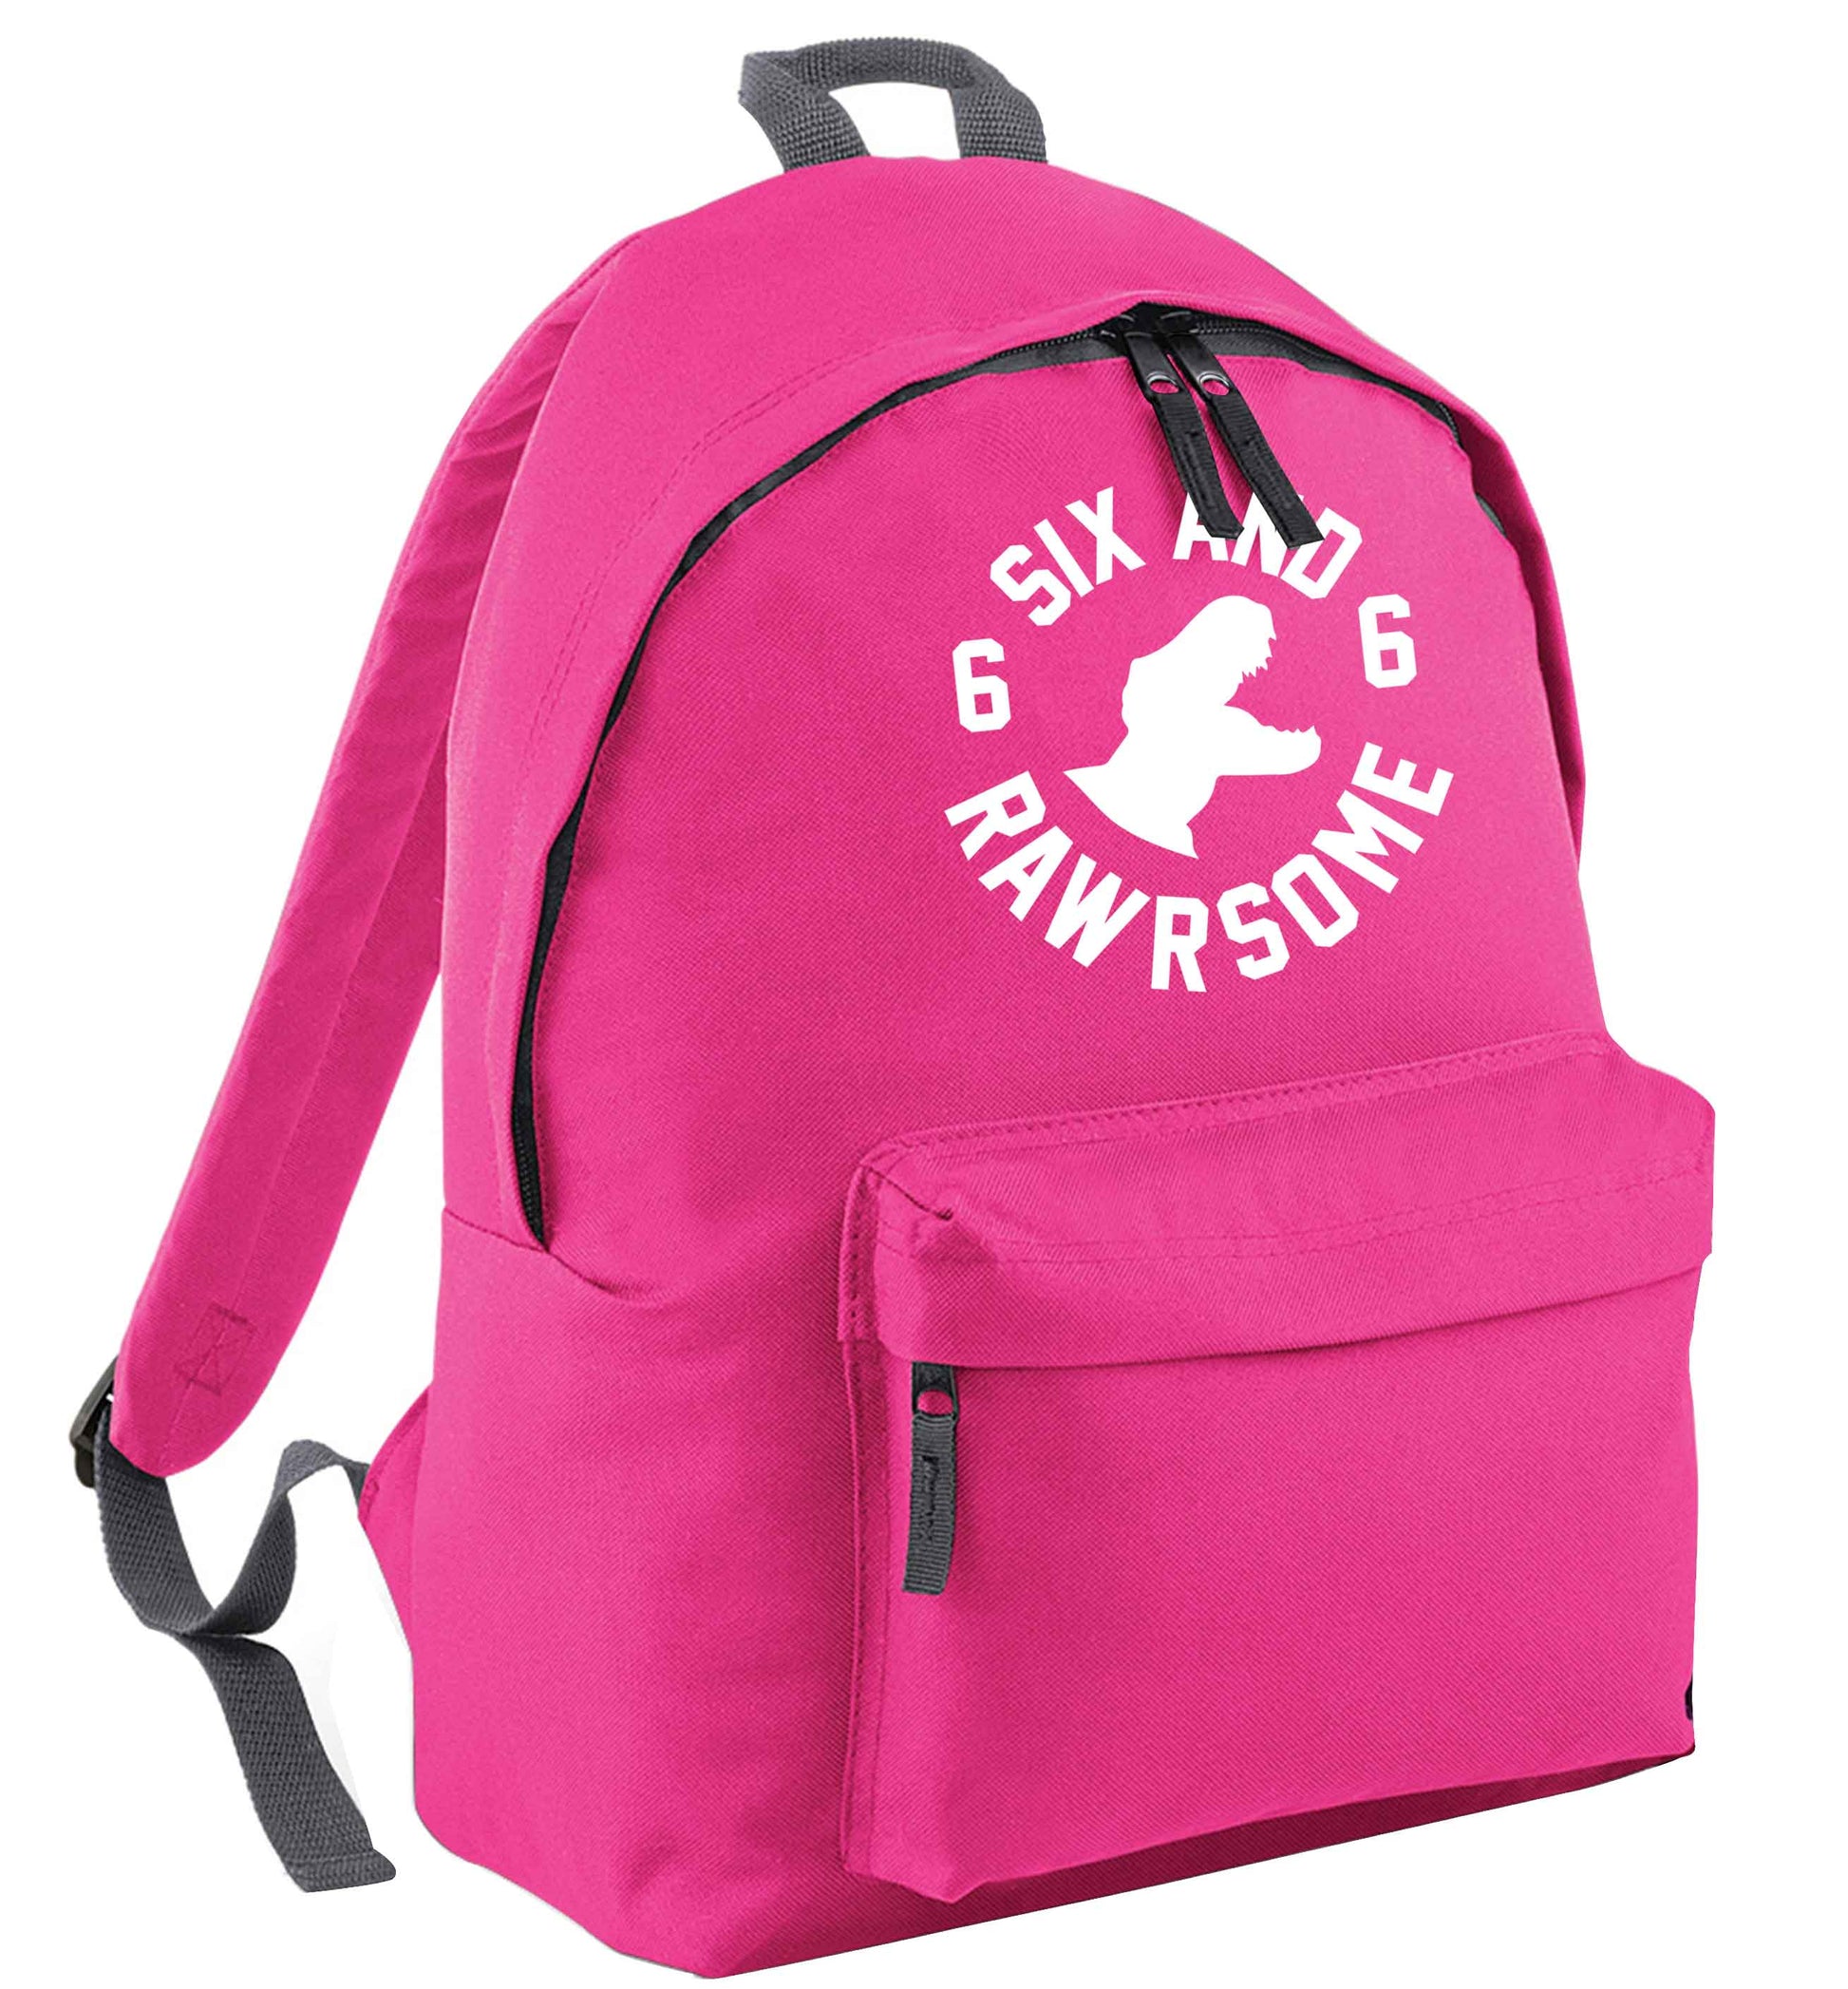 Six and rawrsome pink adults backpack